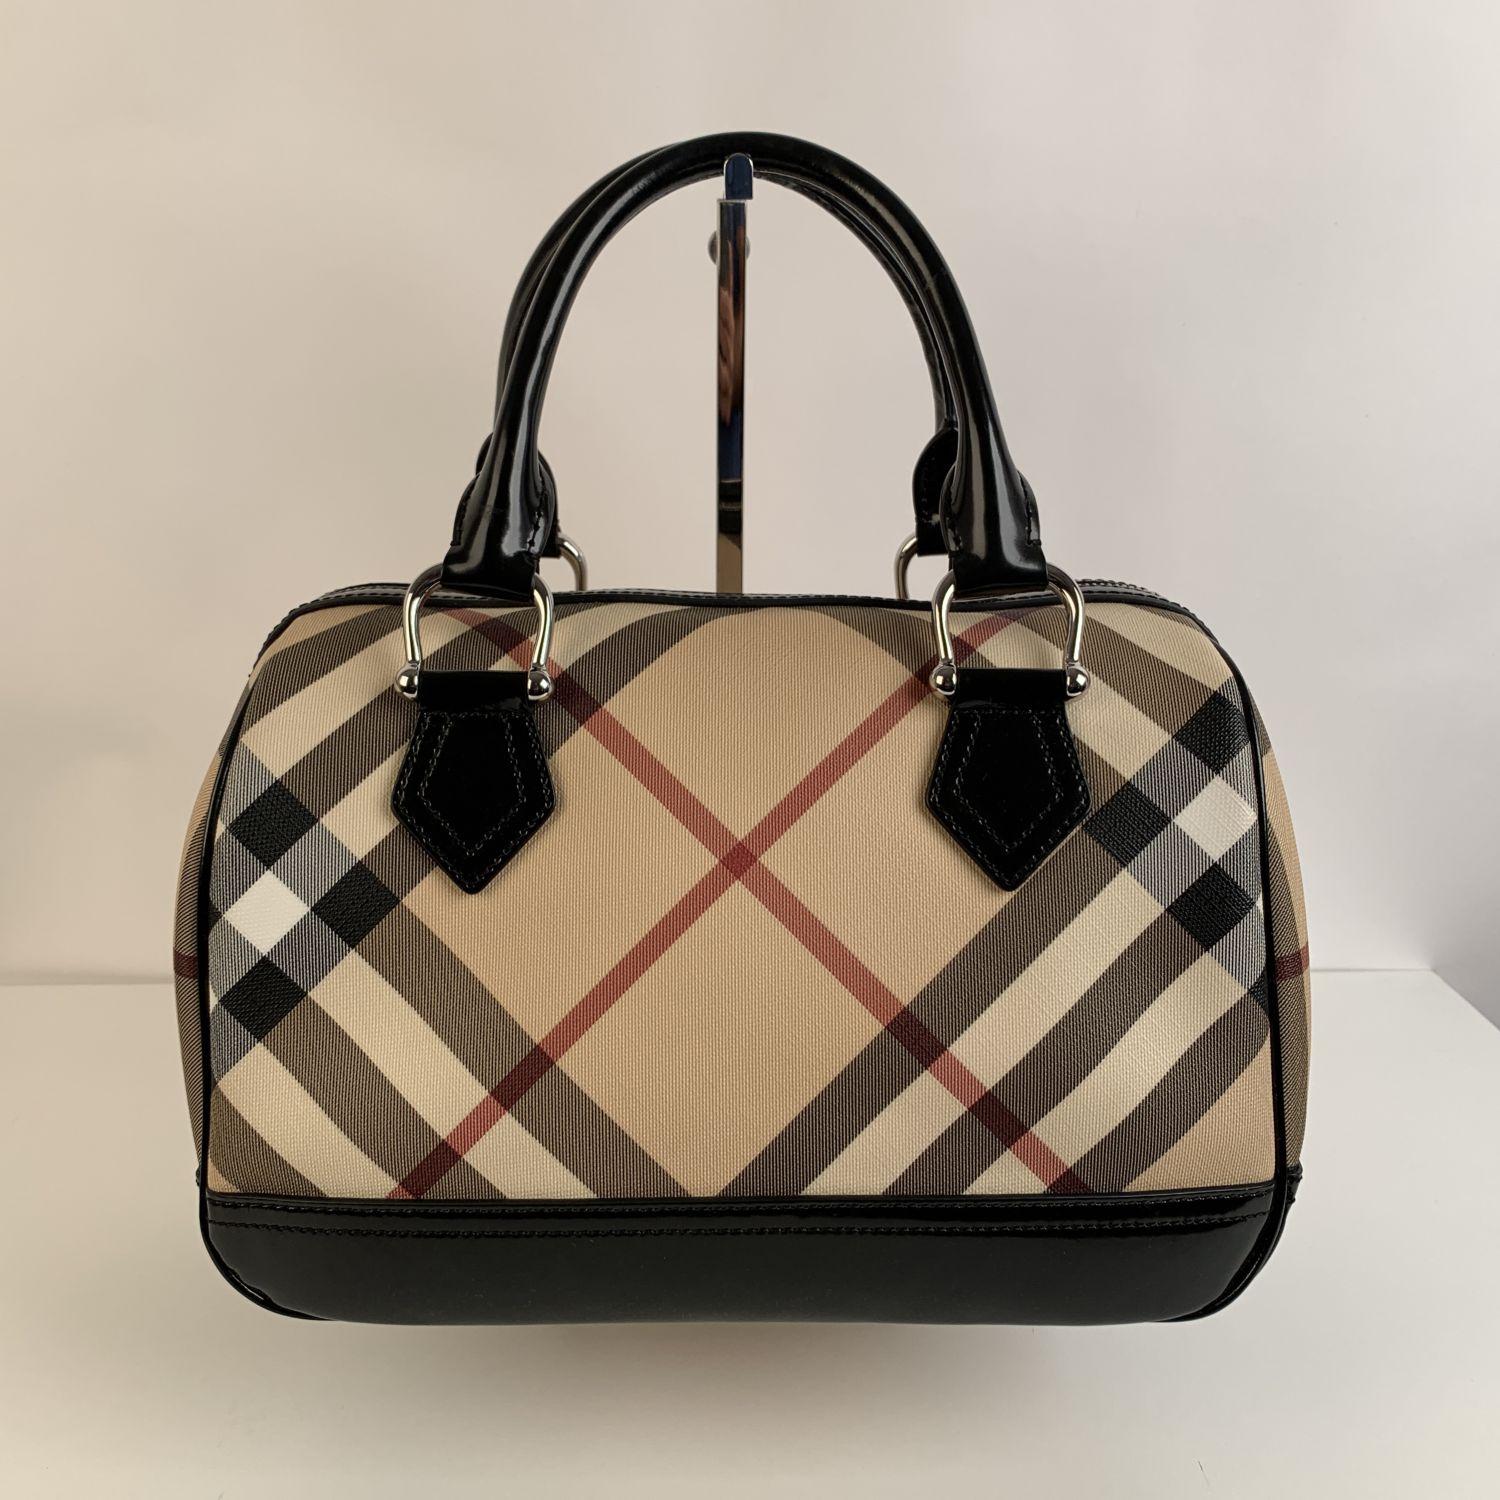 This beautiful Bag will come with a Certificate of Authenticity provided by Entrupy, leading International Fashion Authenticators. The certificate will be provided at no further cost.

- Burberry Nova Check Canvas Boston Bag
- Featuring Burberry's